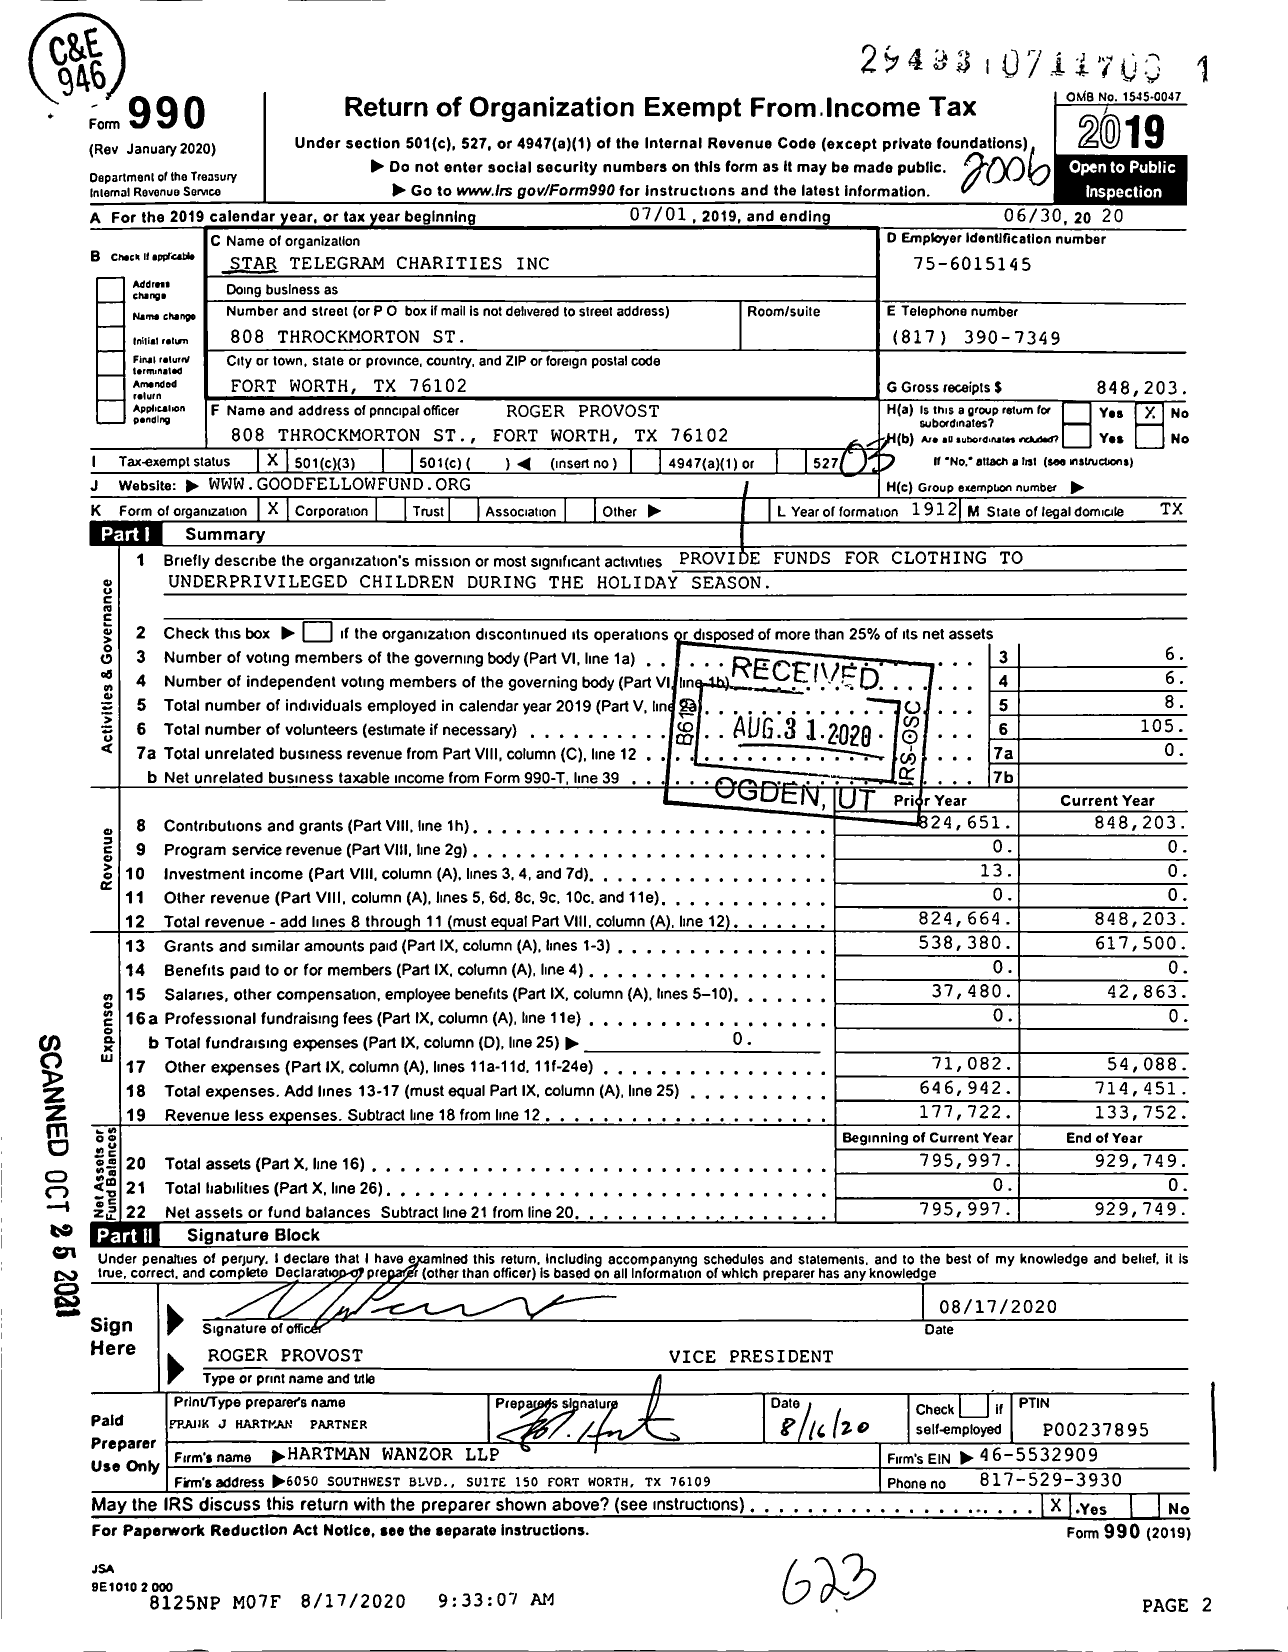 Image of first page of 2019 Form 990 for Star-Telegram Charities